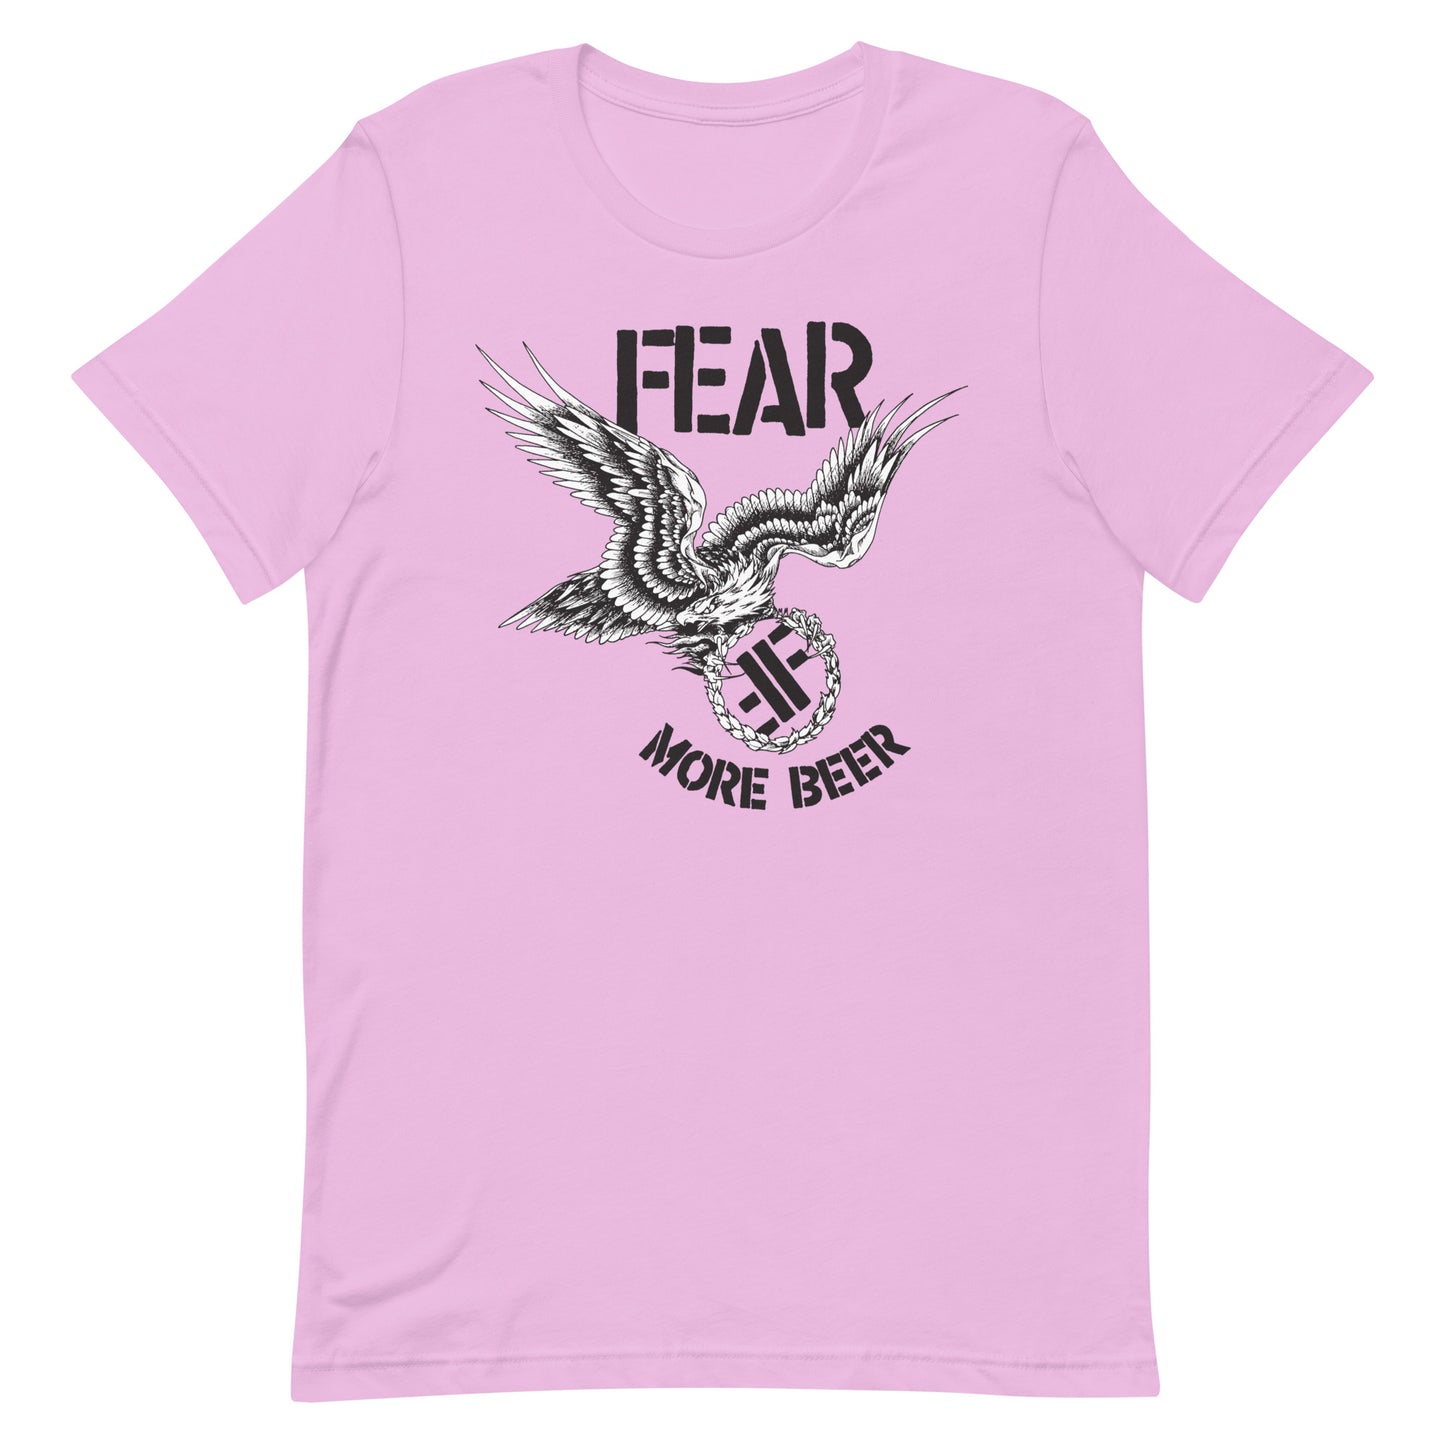 Fear - More Beer T-Shirt